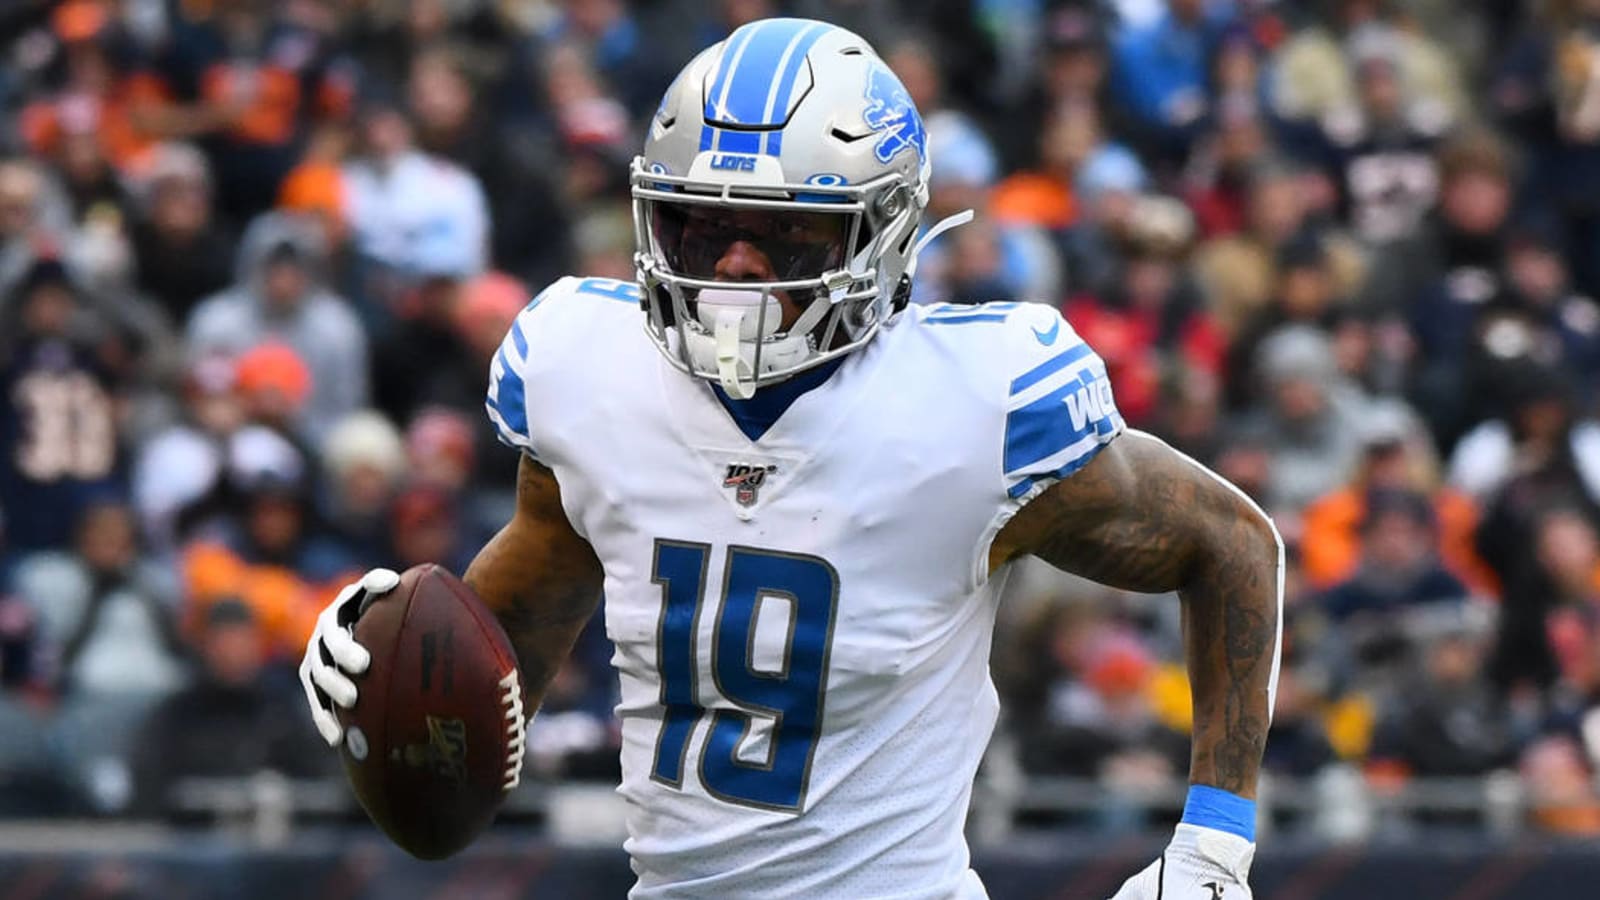 Kenny Golladay expected to make season debut in Week 3